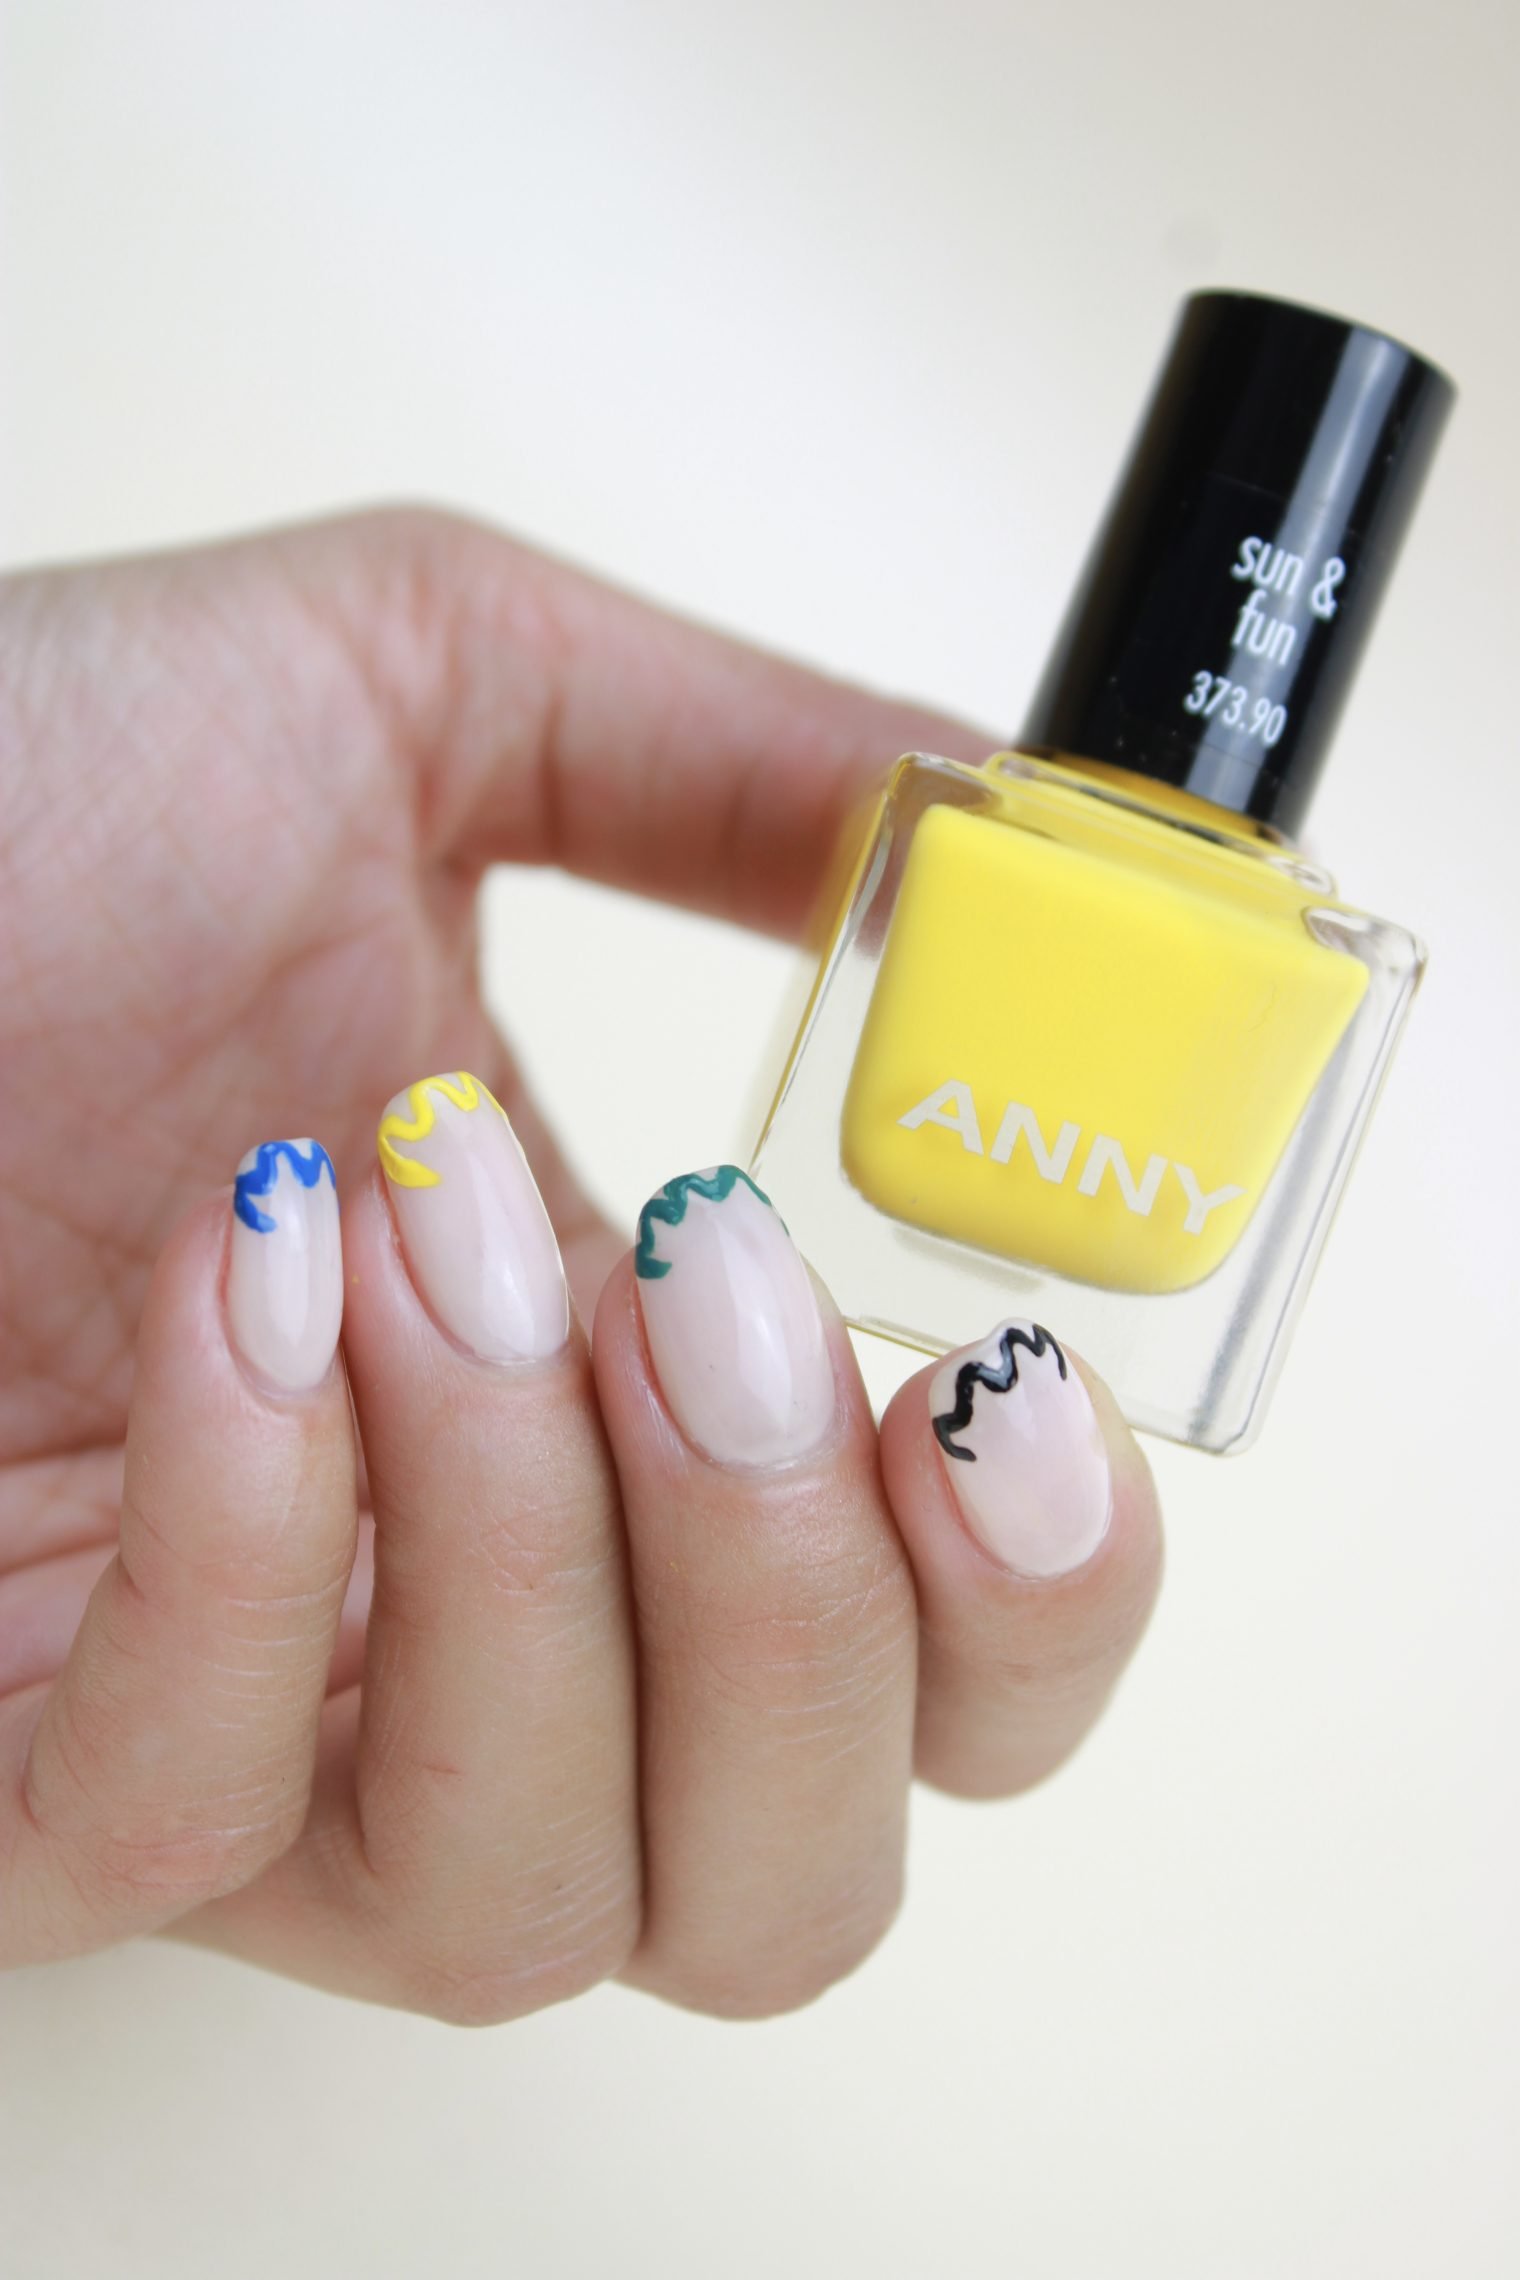 Scribble French Nail Art Tutorial | ANNY